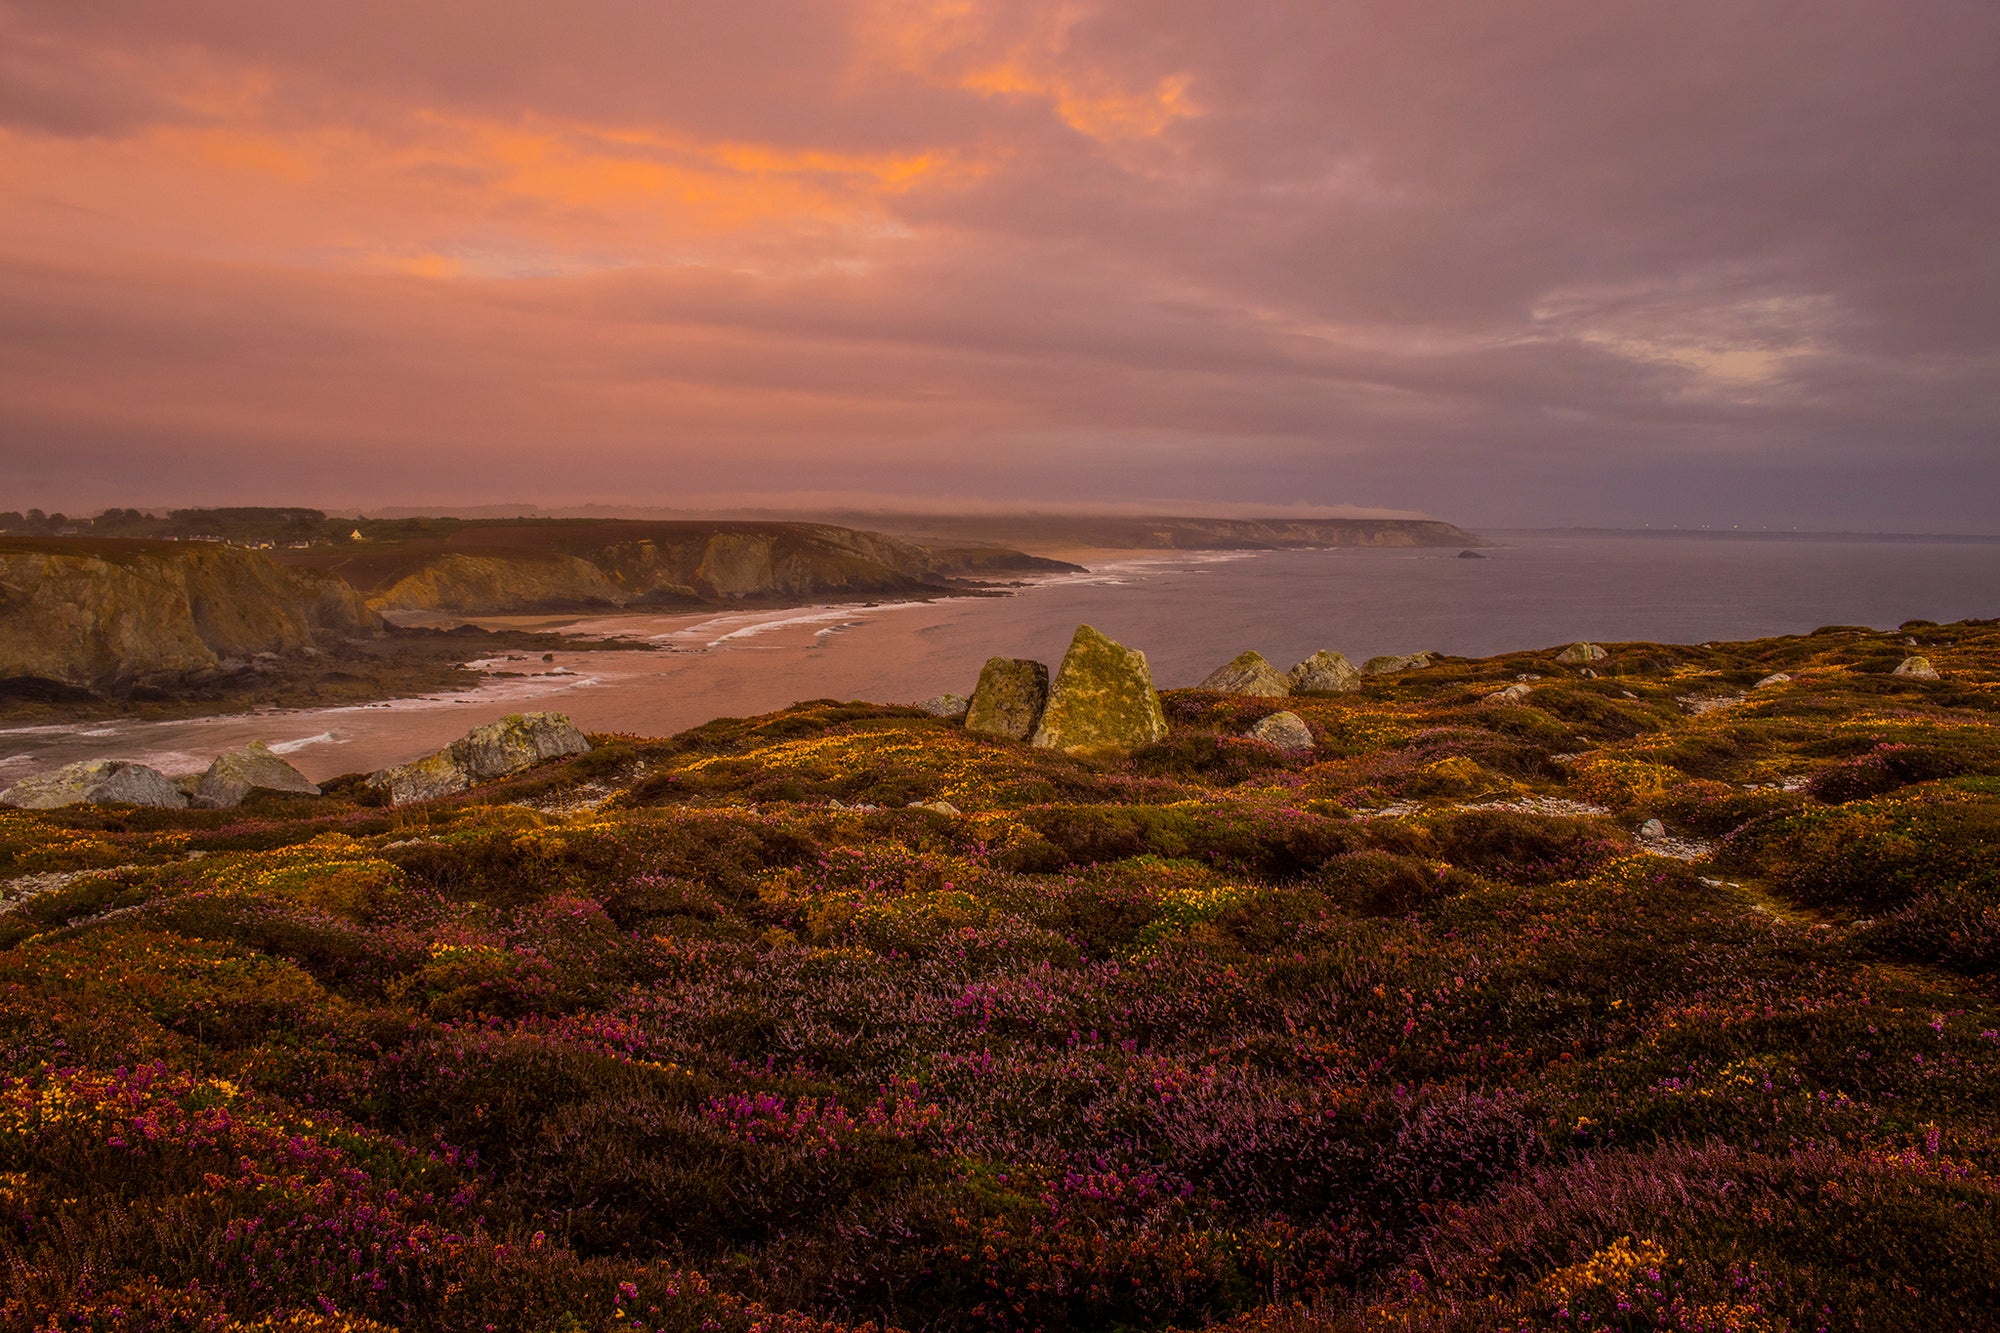 Evening light on the coast of Brittany in Northern France. The colourful heathers and the luminescent clouds and rocks.